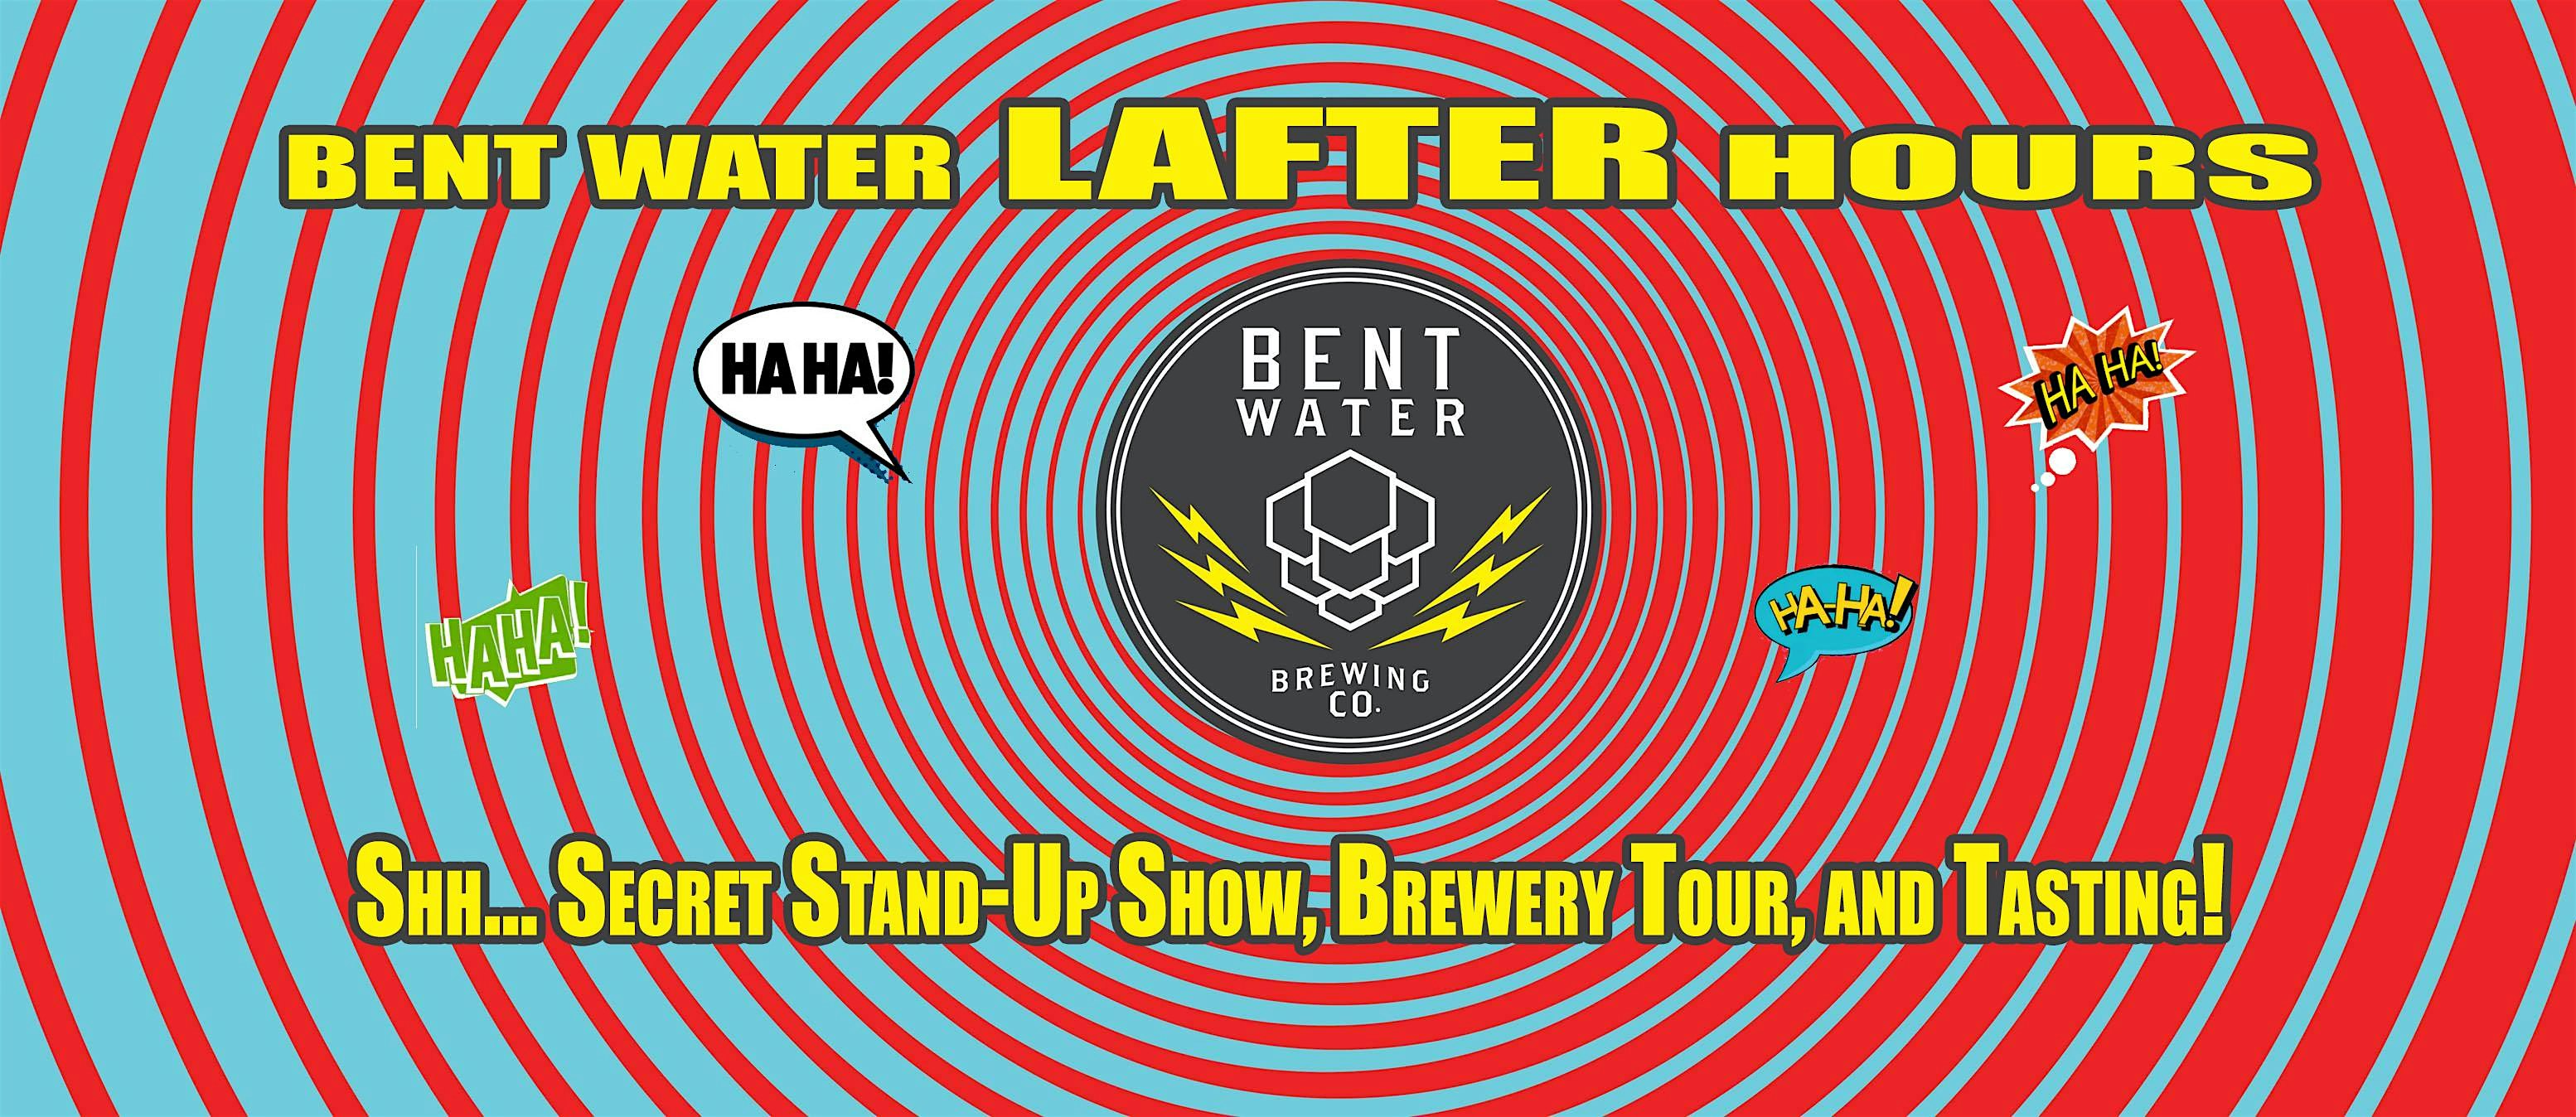 Bent Water LAFTER Hours: Secret Stand-Up, Brewery Tour & Tasting